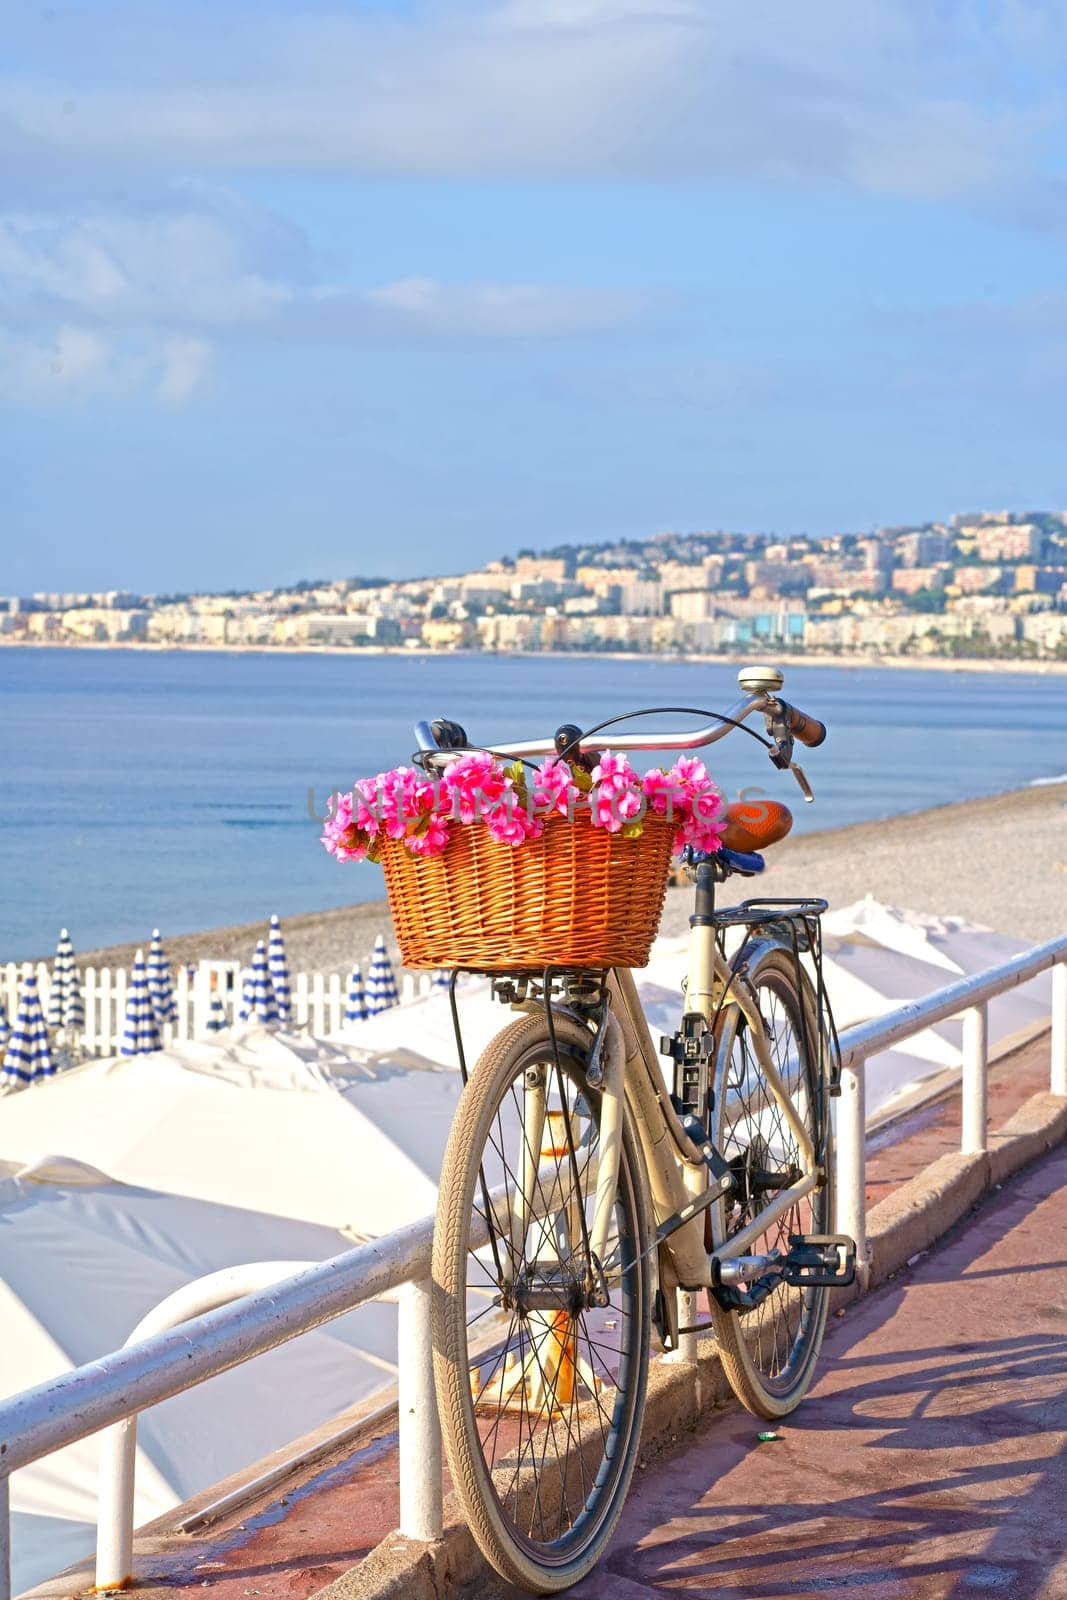 France. Nice. The bicycle is standing on the street